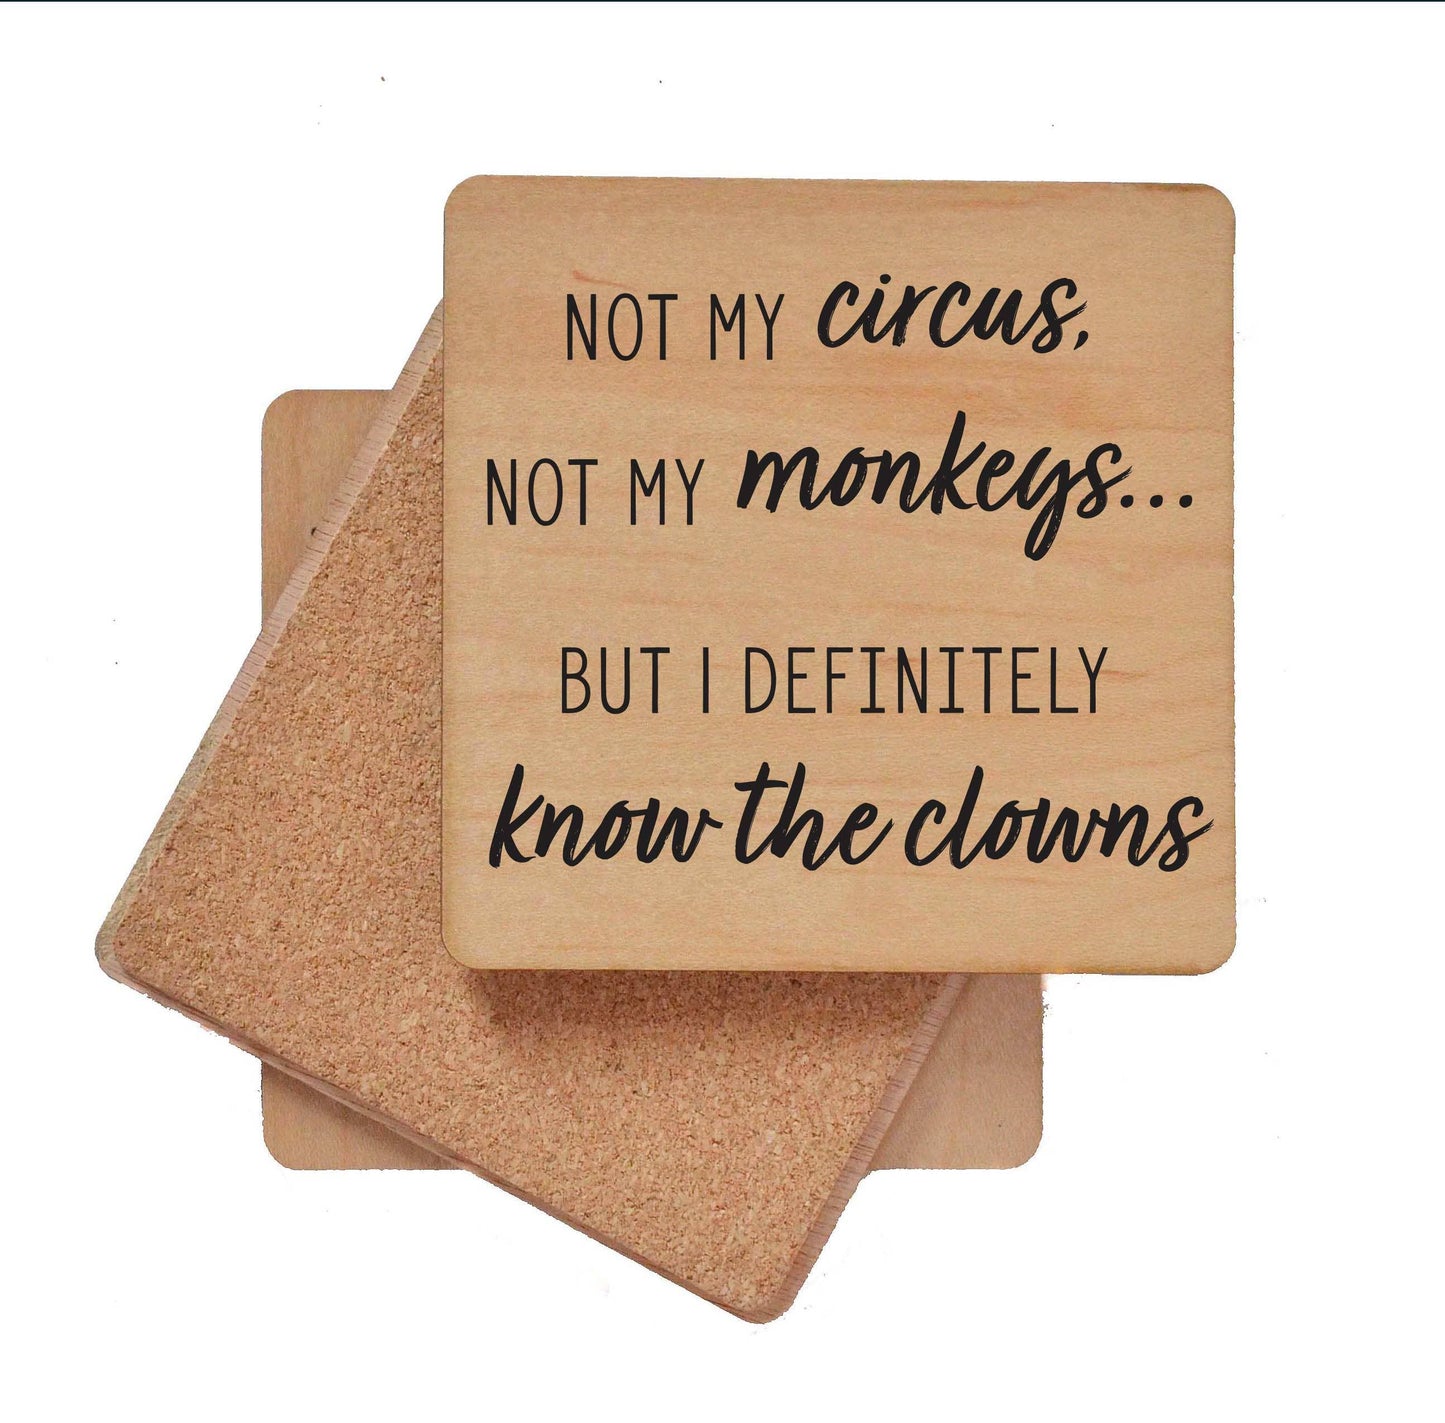 Not my Circus - Funny Wood Coasters Small Gift